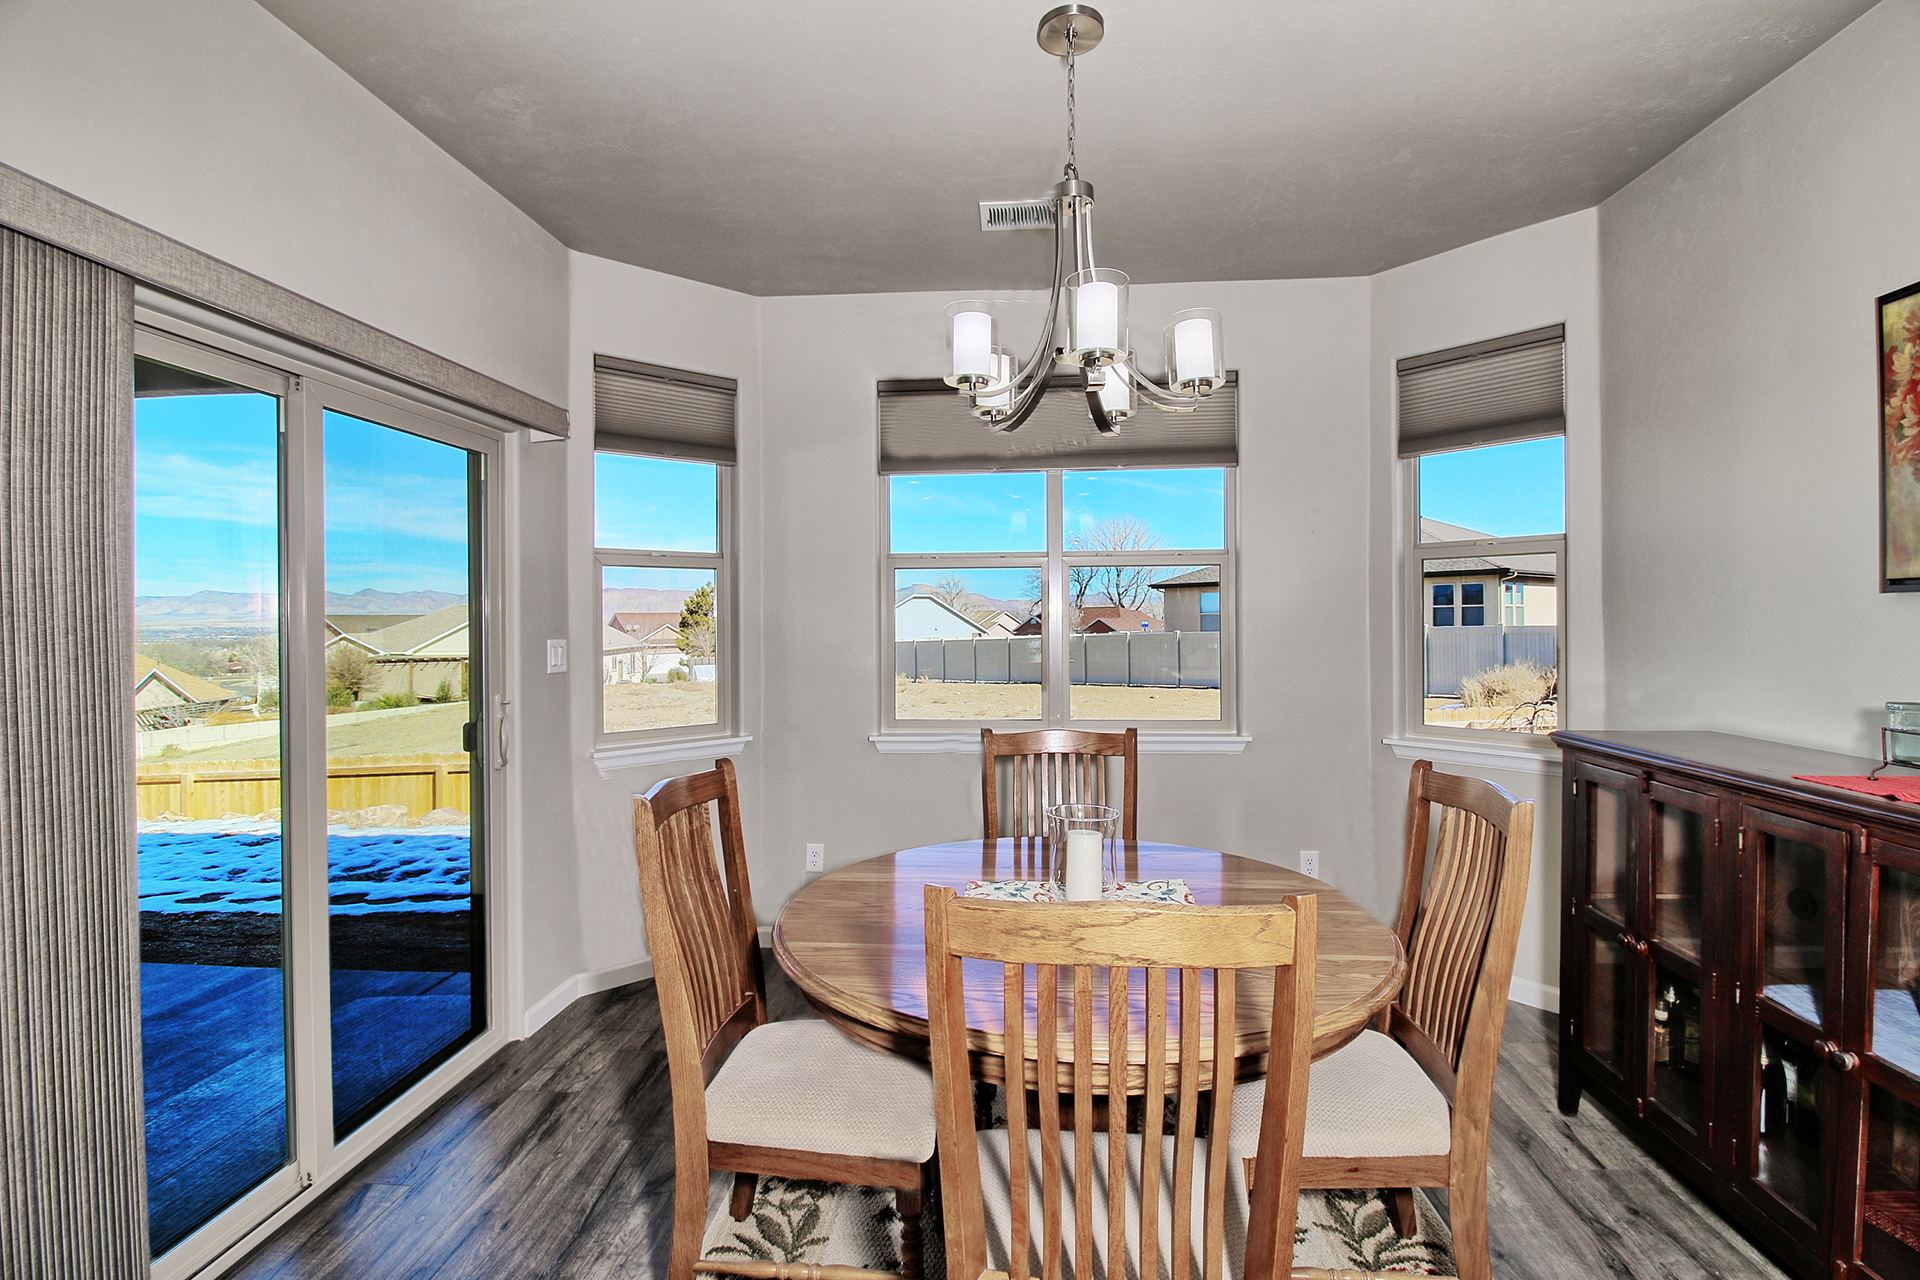 115 Dry Creek Ct. Grand Junction, CO 81503